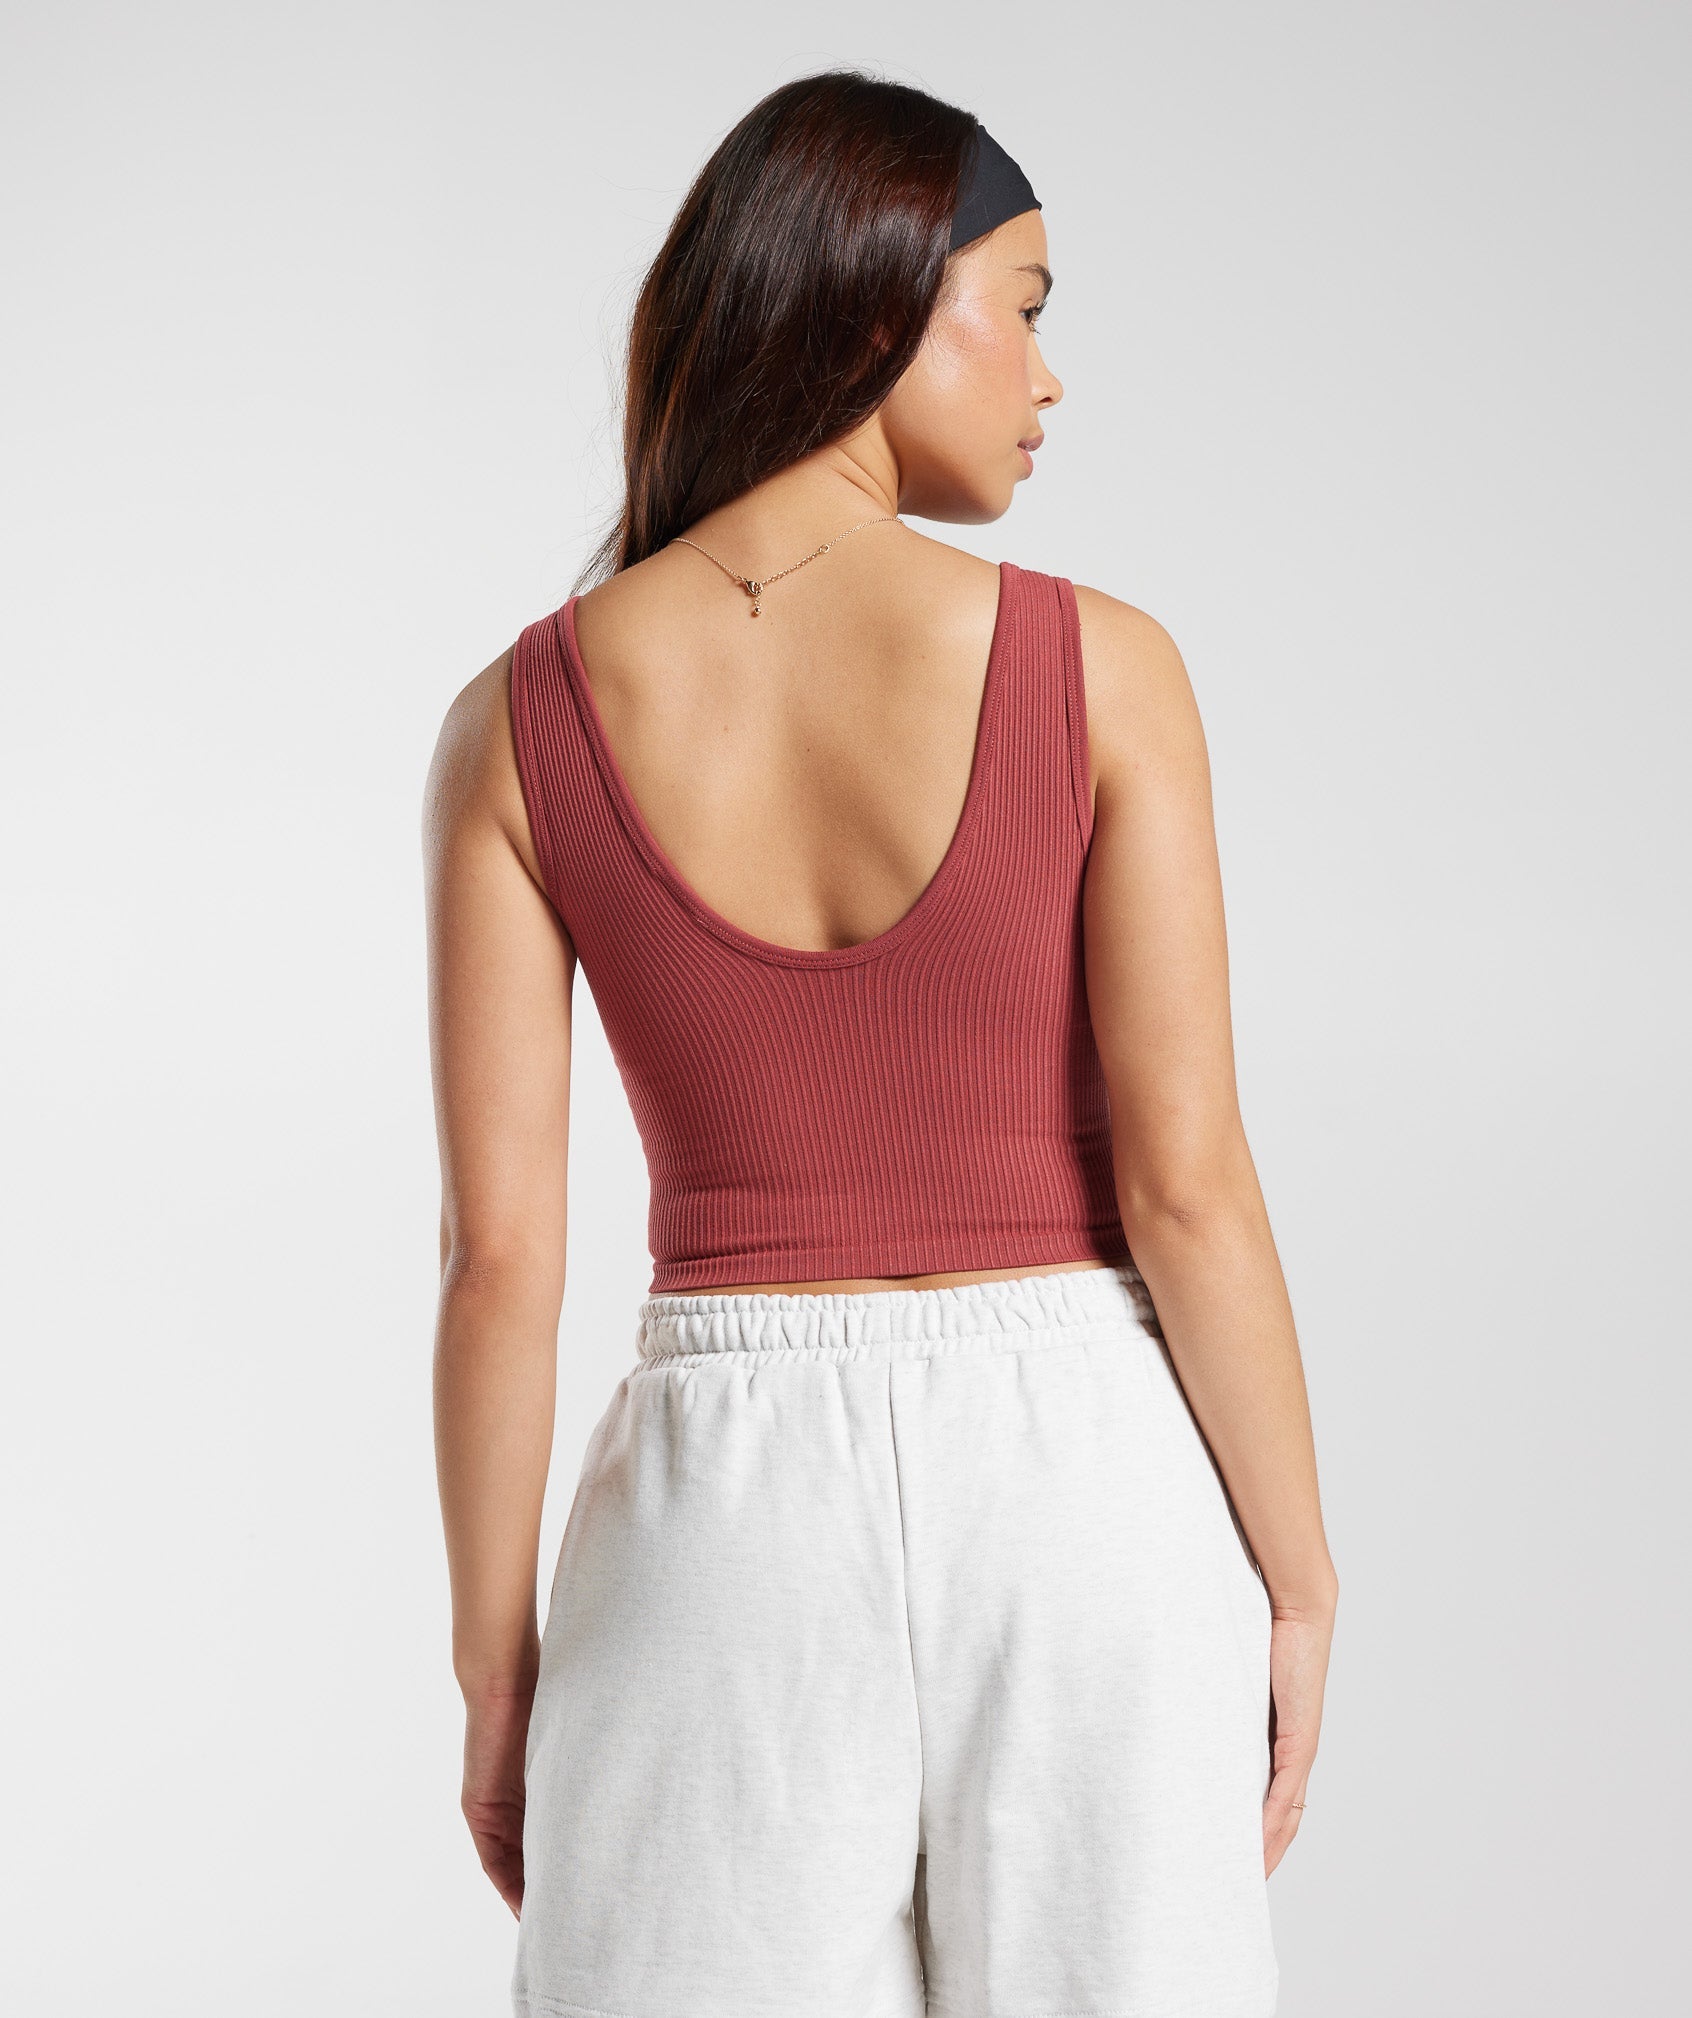 Rest Day Seamless Midi Tank in Pomegranate Red - view 2